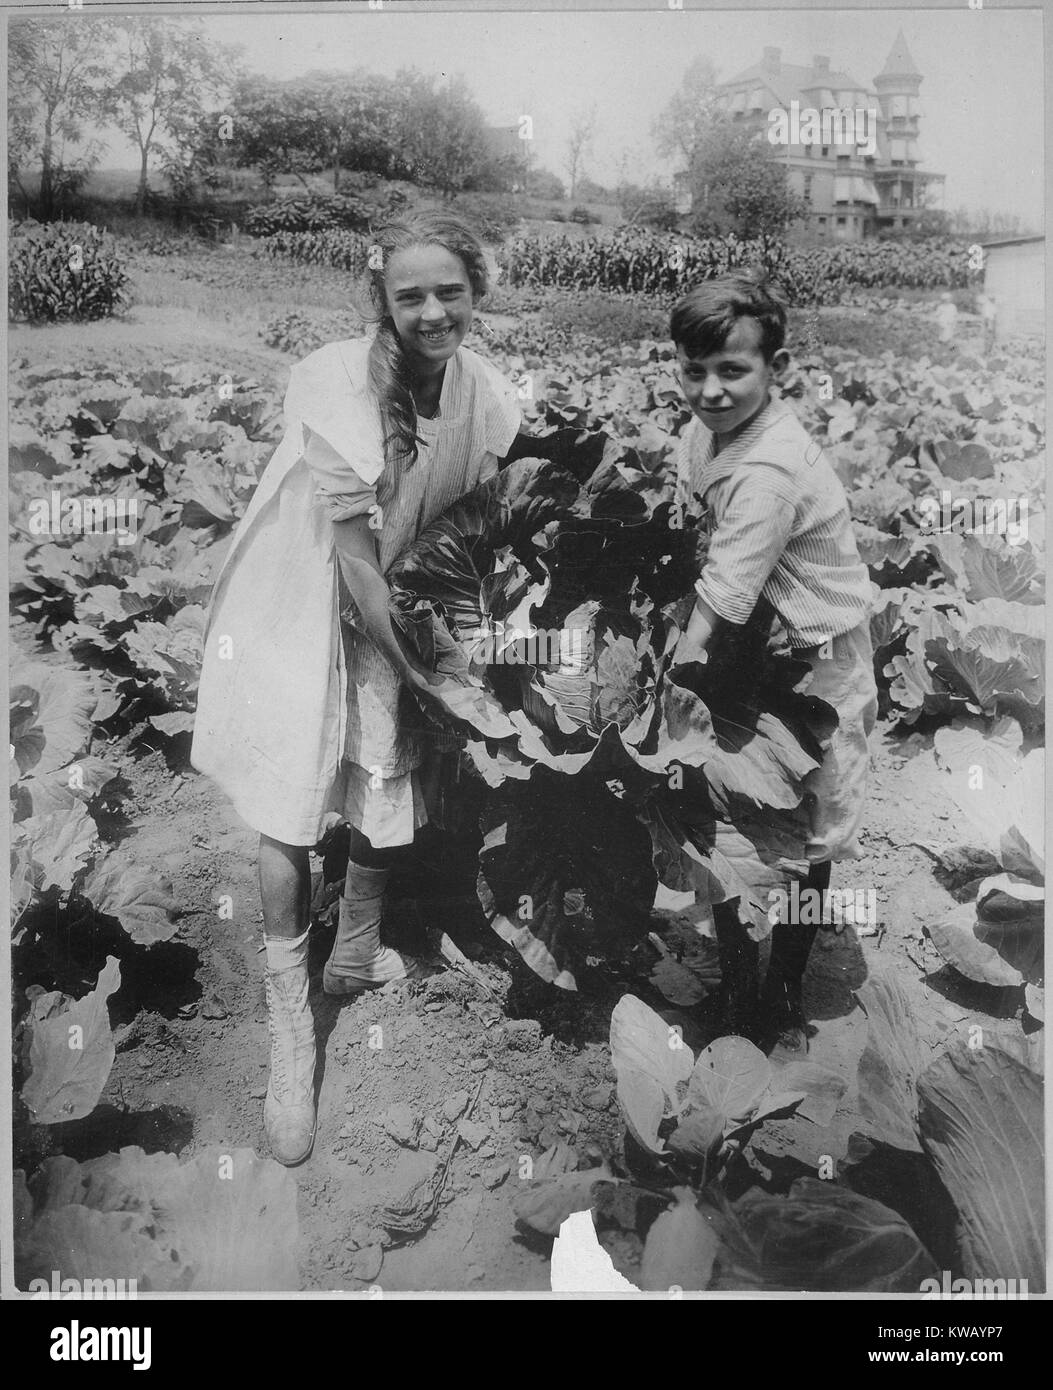 A boy and girl smile and proudly hold an enormous head of cabbage they grew at the War garden of Public School 88, a large plot of land raising fruits and vegetables for the US war efforts, Borough of Queens, New York, New York, 1918. Image courtesy National Archives. Stock Photo